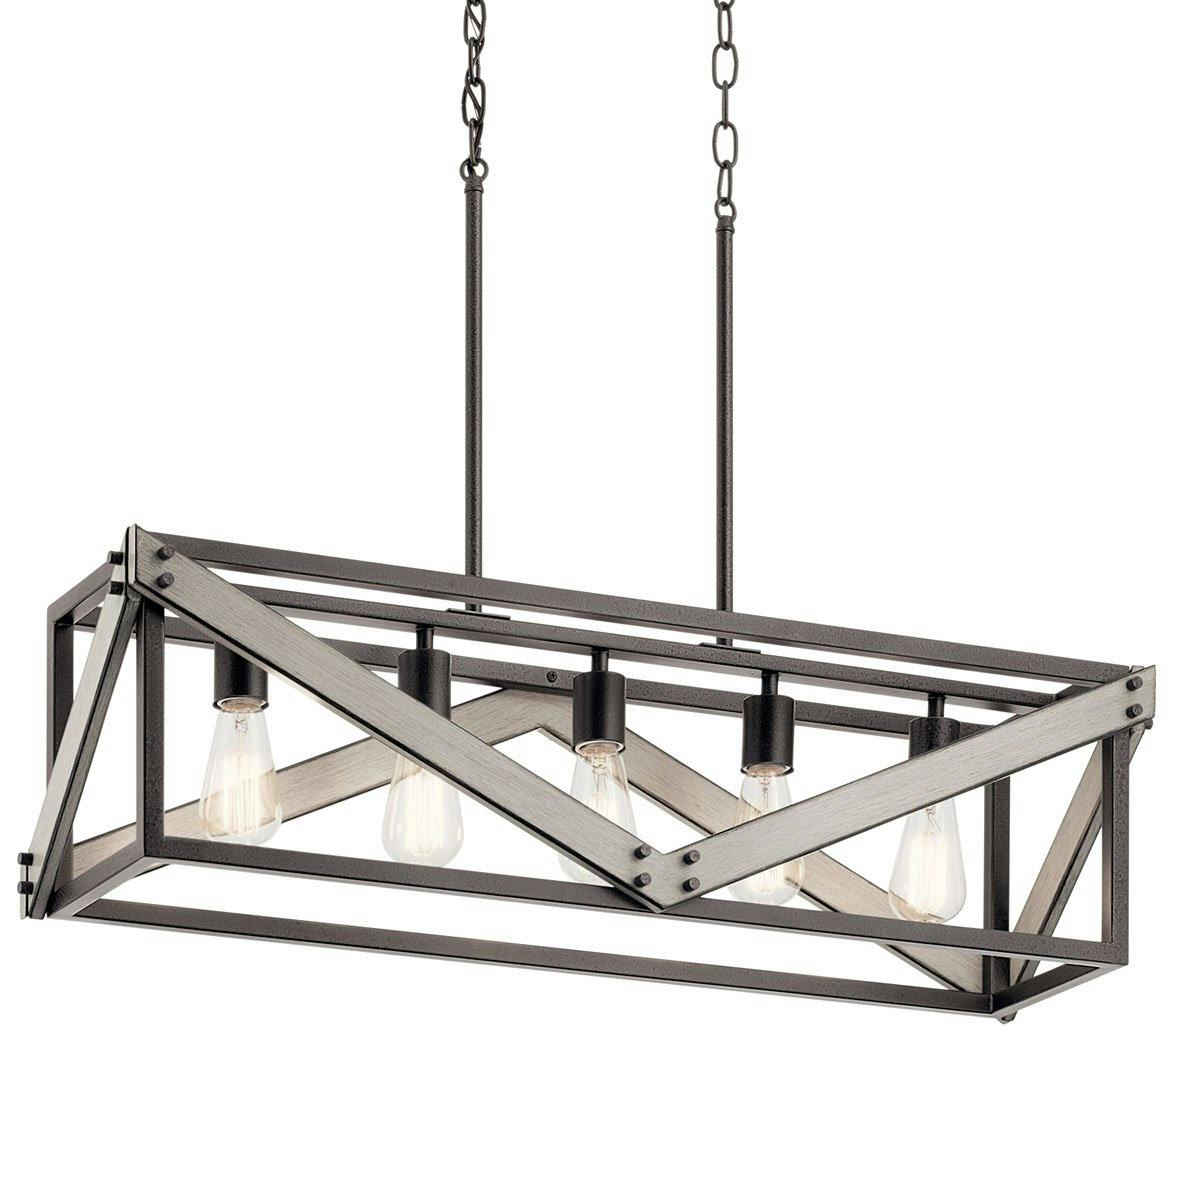 Barrington 32" Chandelier Anvil Iron  without the canopy on a white background